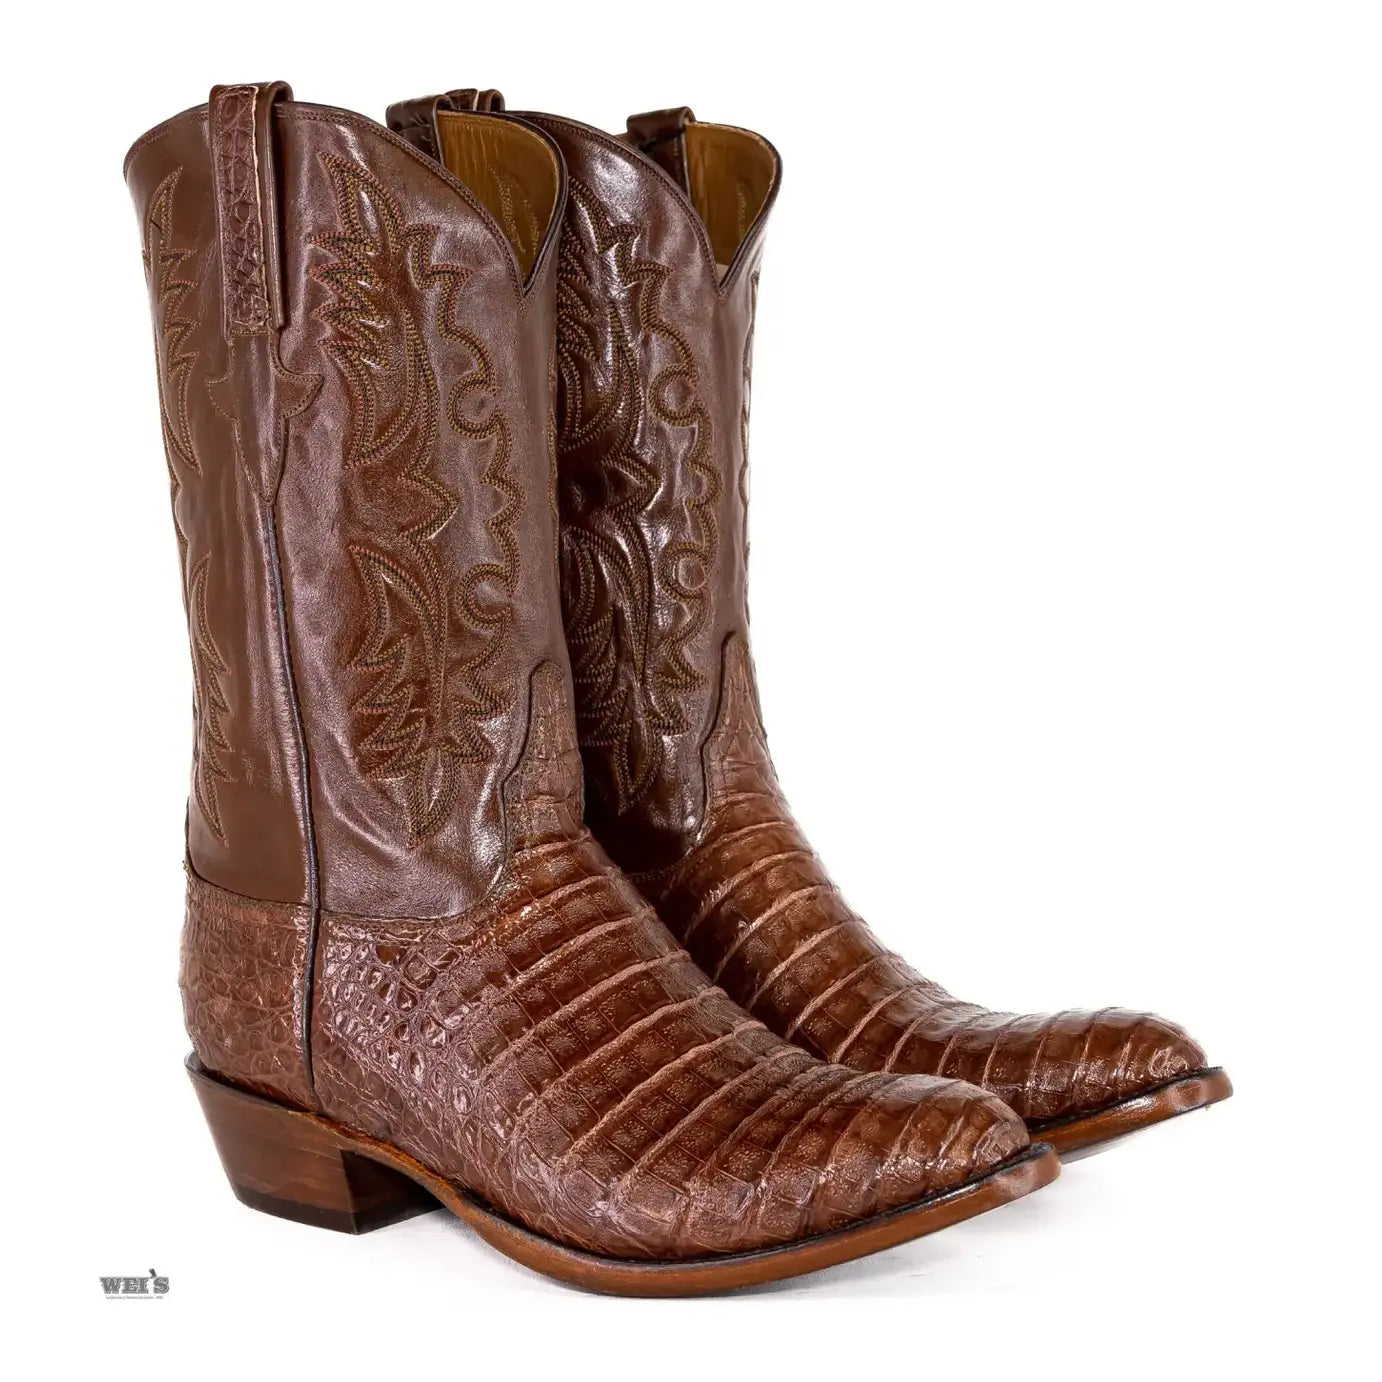 Lucchese Men's Cowboy Boots 13" Exotic Caiman E2115.63EE